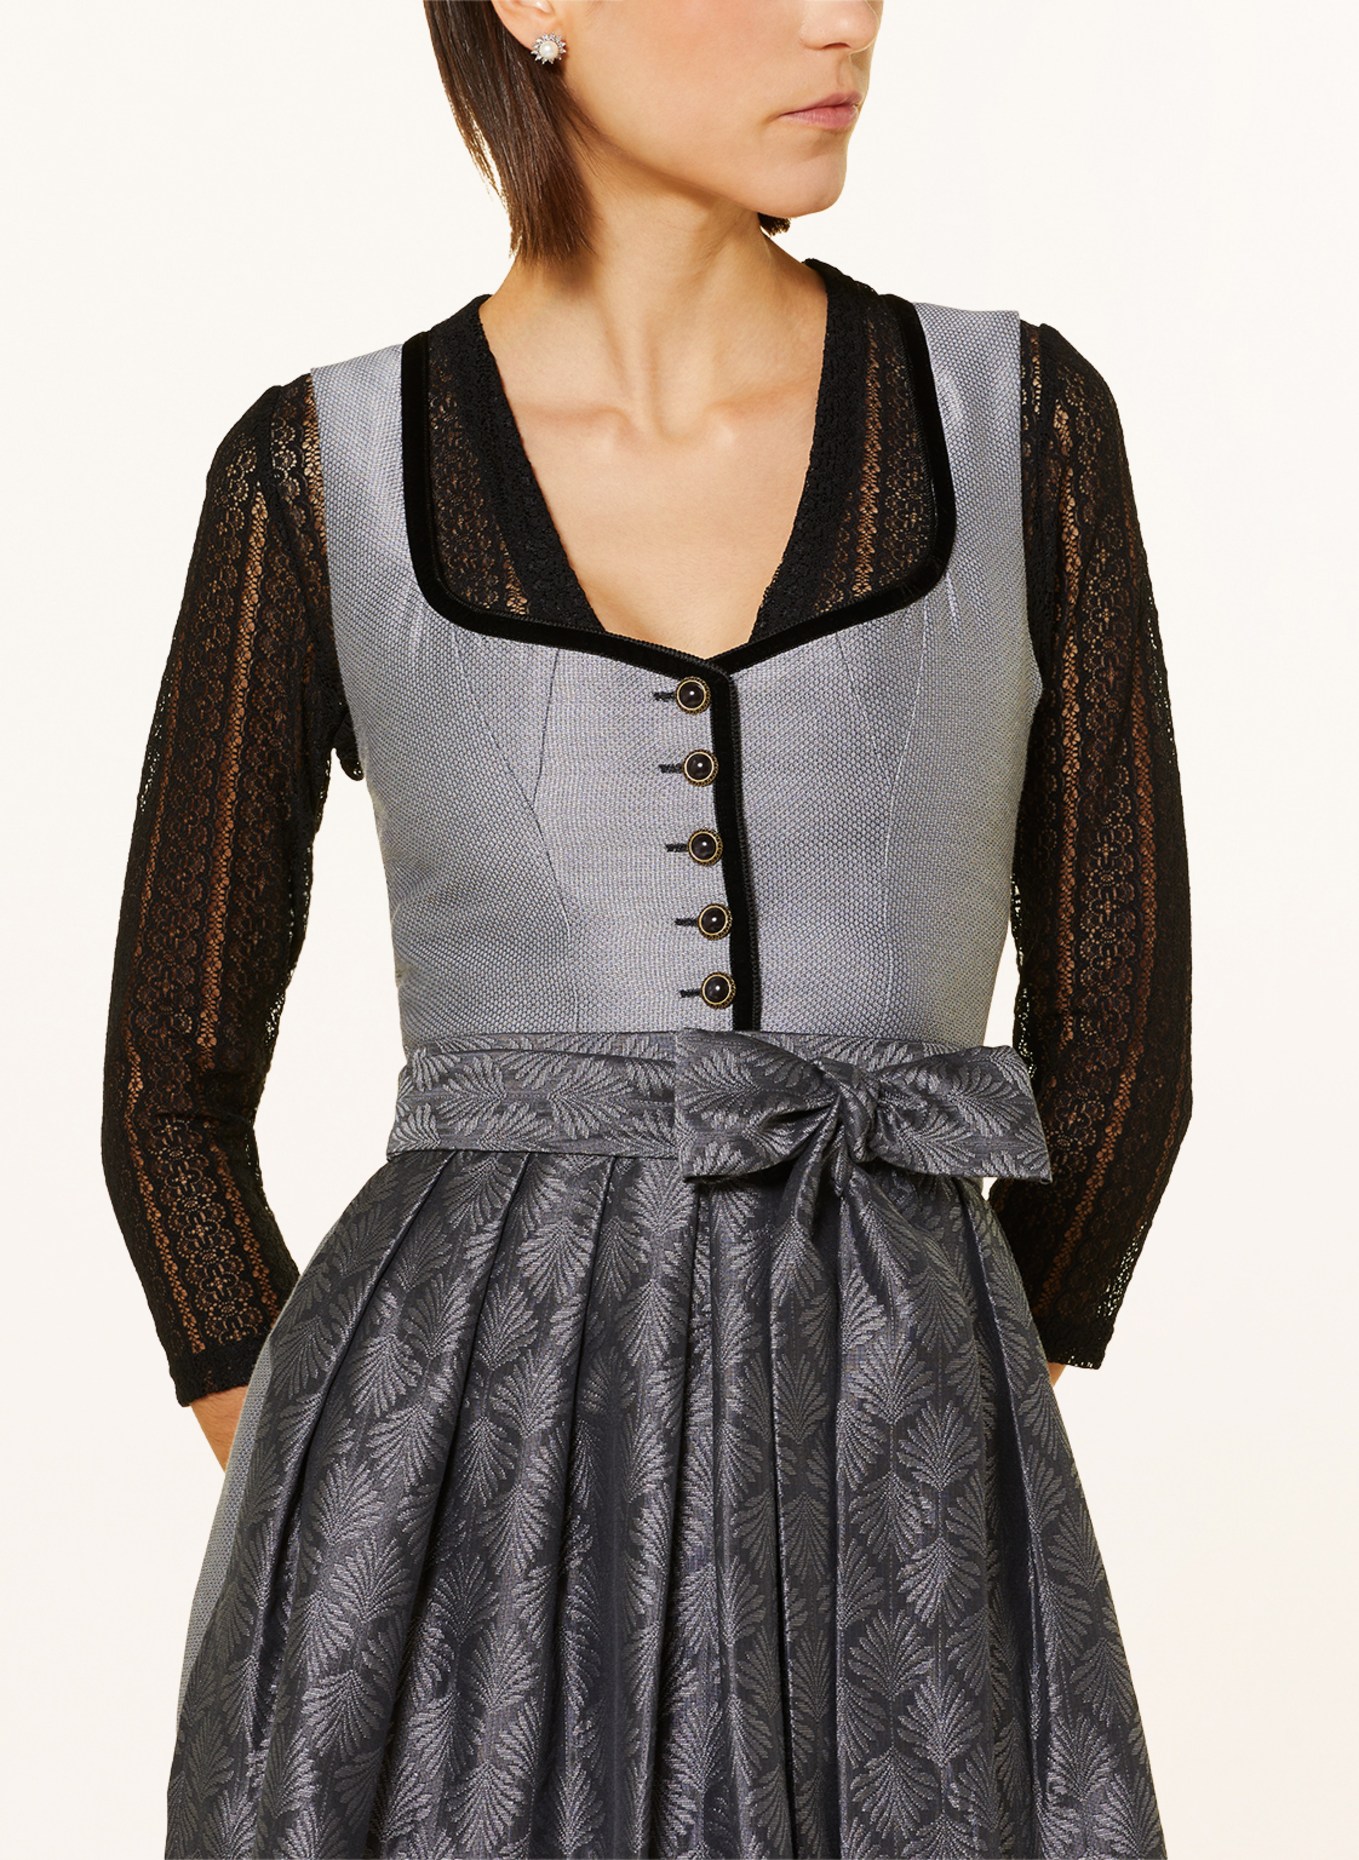 AlpenHERZ Dirndl blouse NAOMI in lace with 3/4 sleeves, Color: BLACK (Image 3)